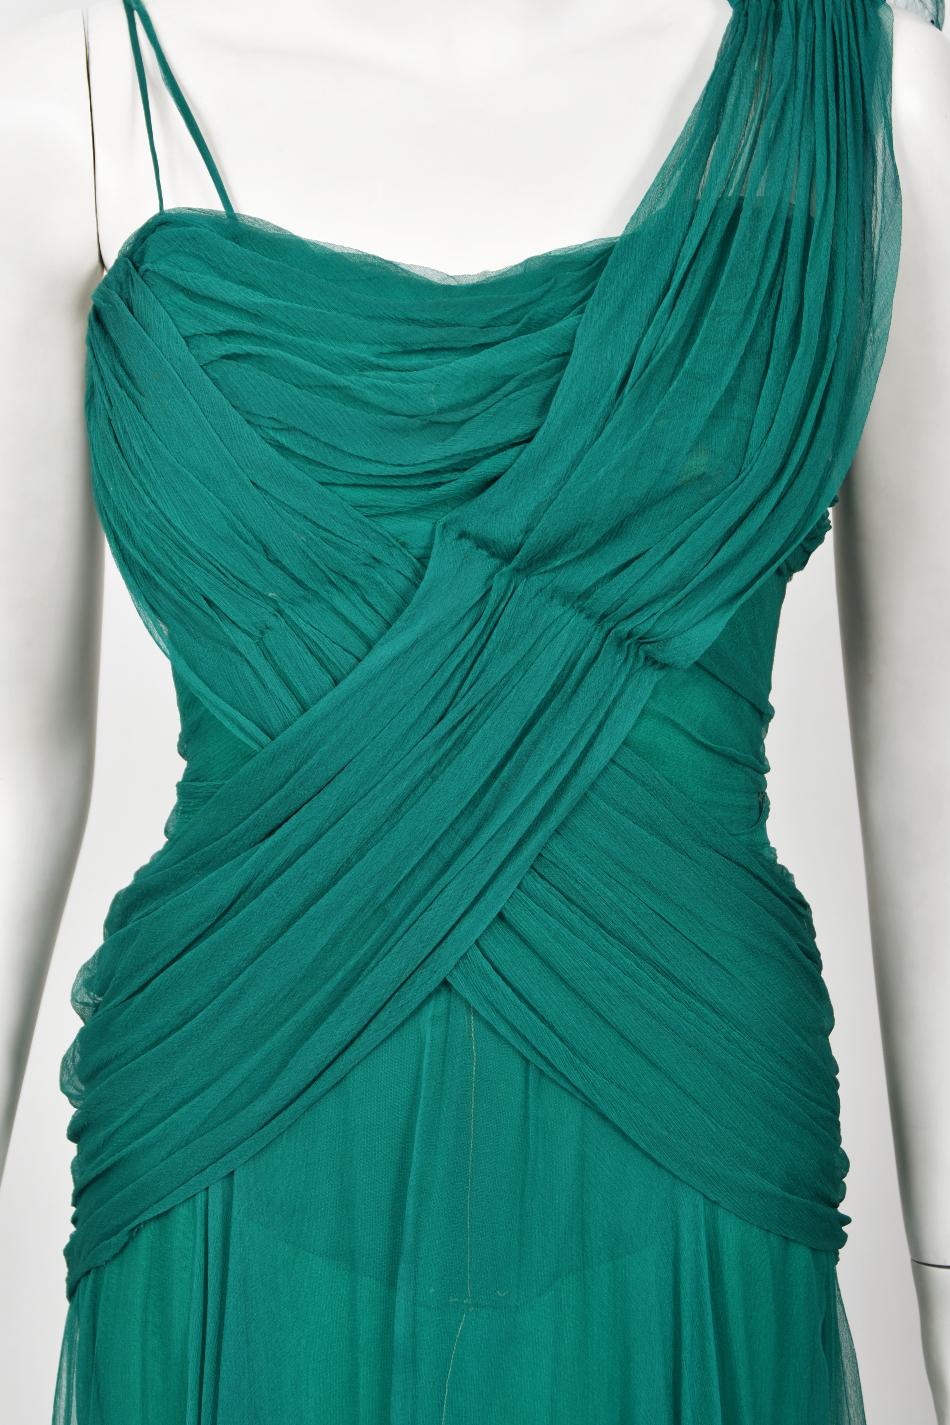 Vintage 1950's Irene Lentz Couture Teal Green Draped Silk Grecian Goddess Gown For Sale 1